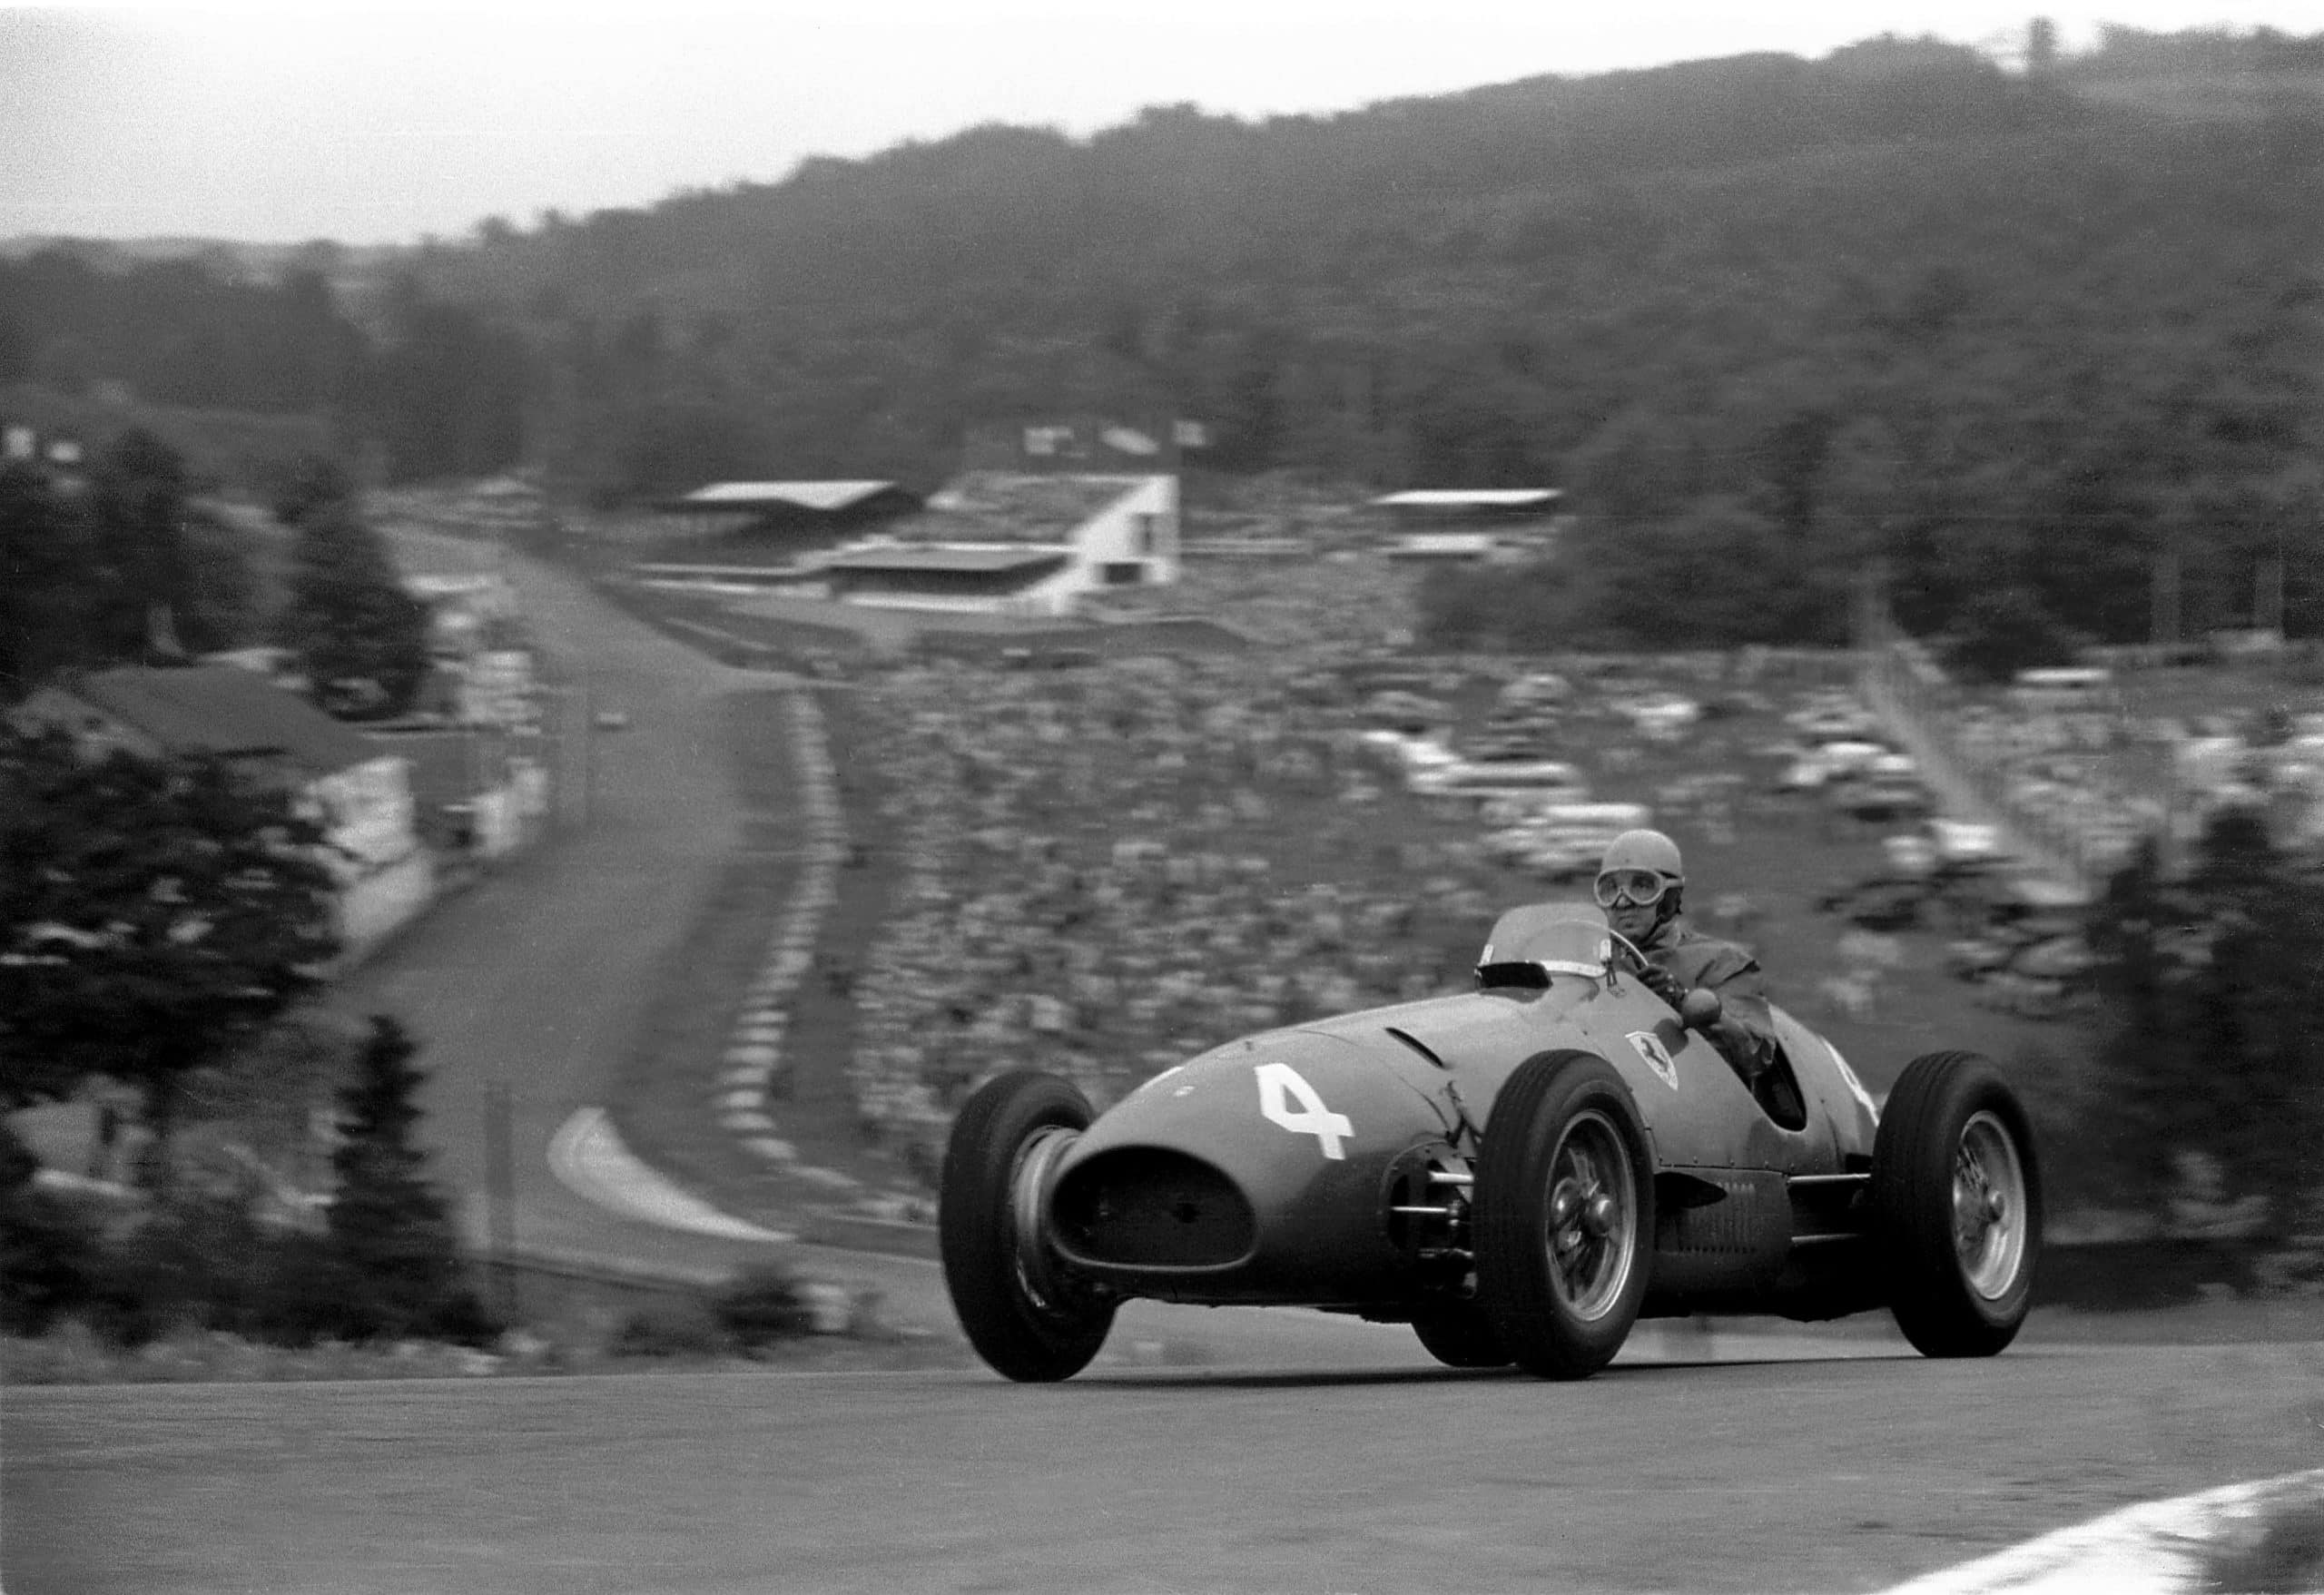 Alberto Ascari tops the hill at Raidillon on his way to a victory with the Ferrari 500 F2 during the Belgian Grand Prix, Spa-Francorchamps, 22nd June 1952. (Photo by Klemantaski Collection/Getty Images)